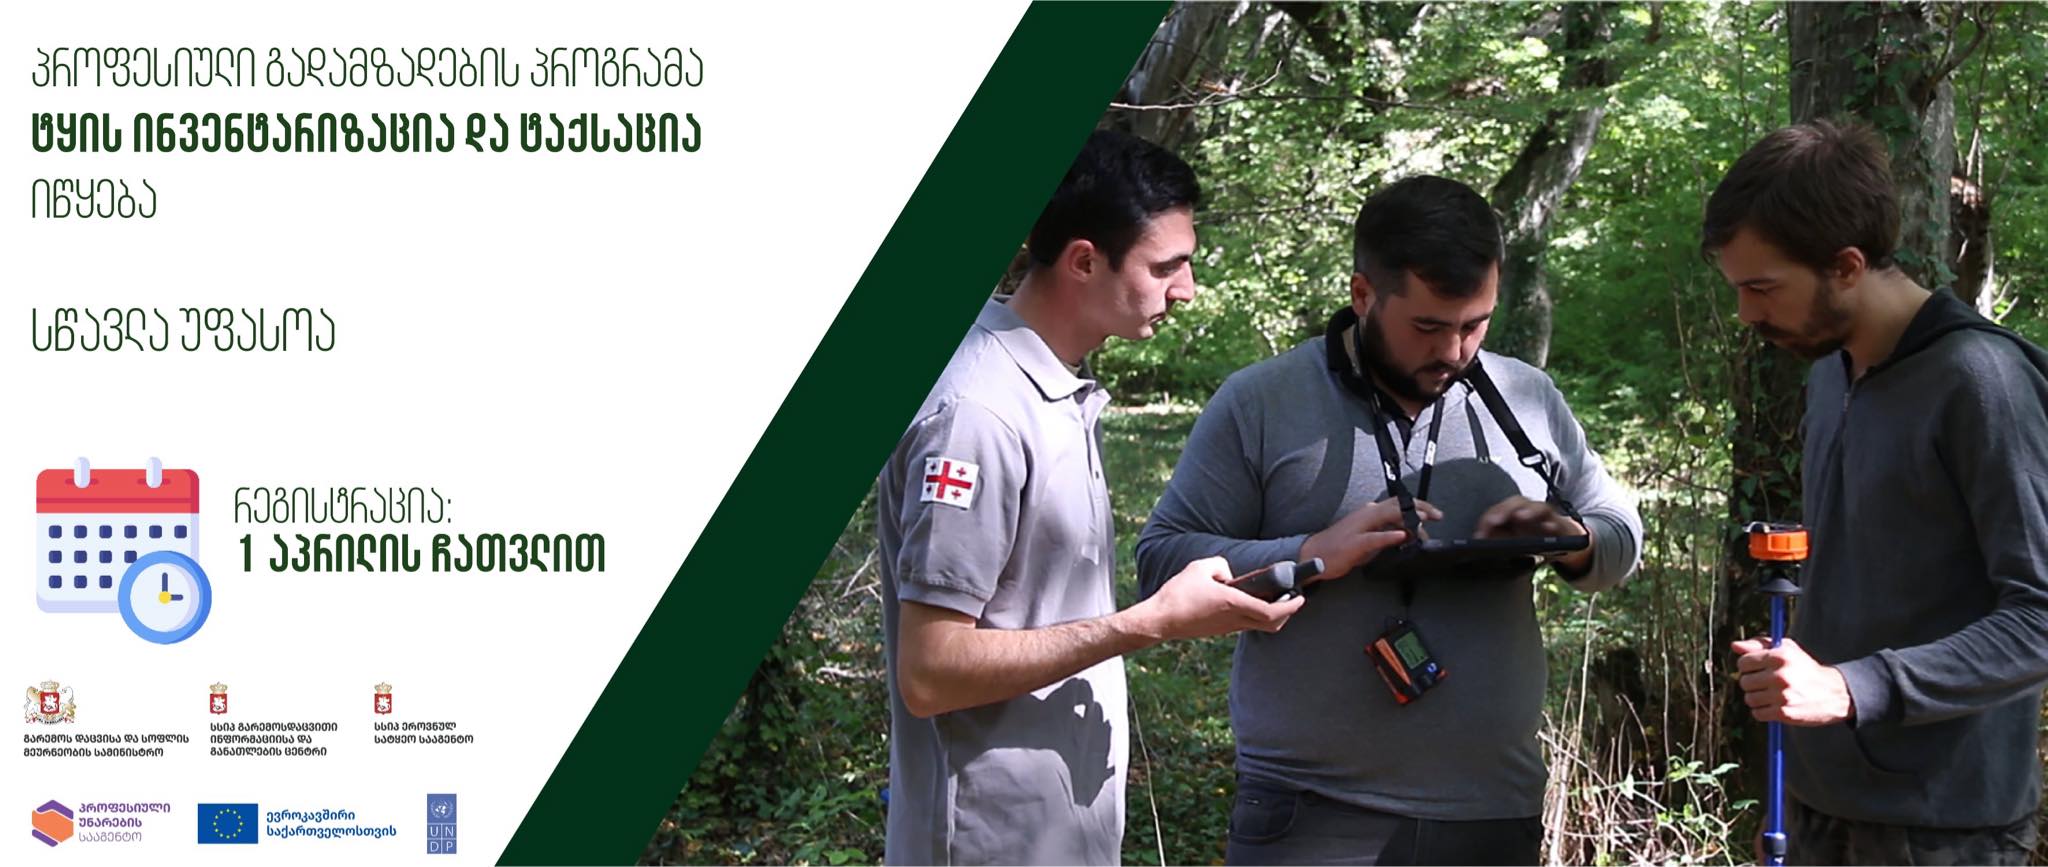 The "Forest Inventory and Taxation" vocational professional training program is underway